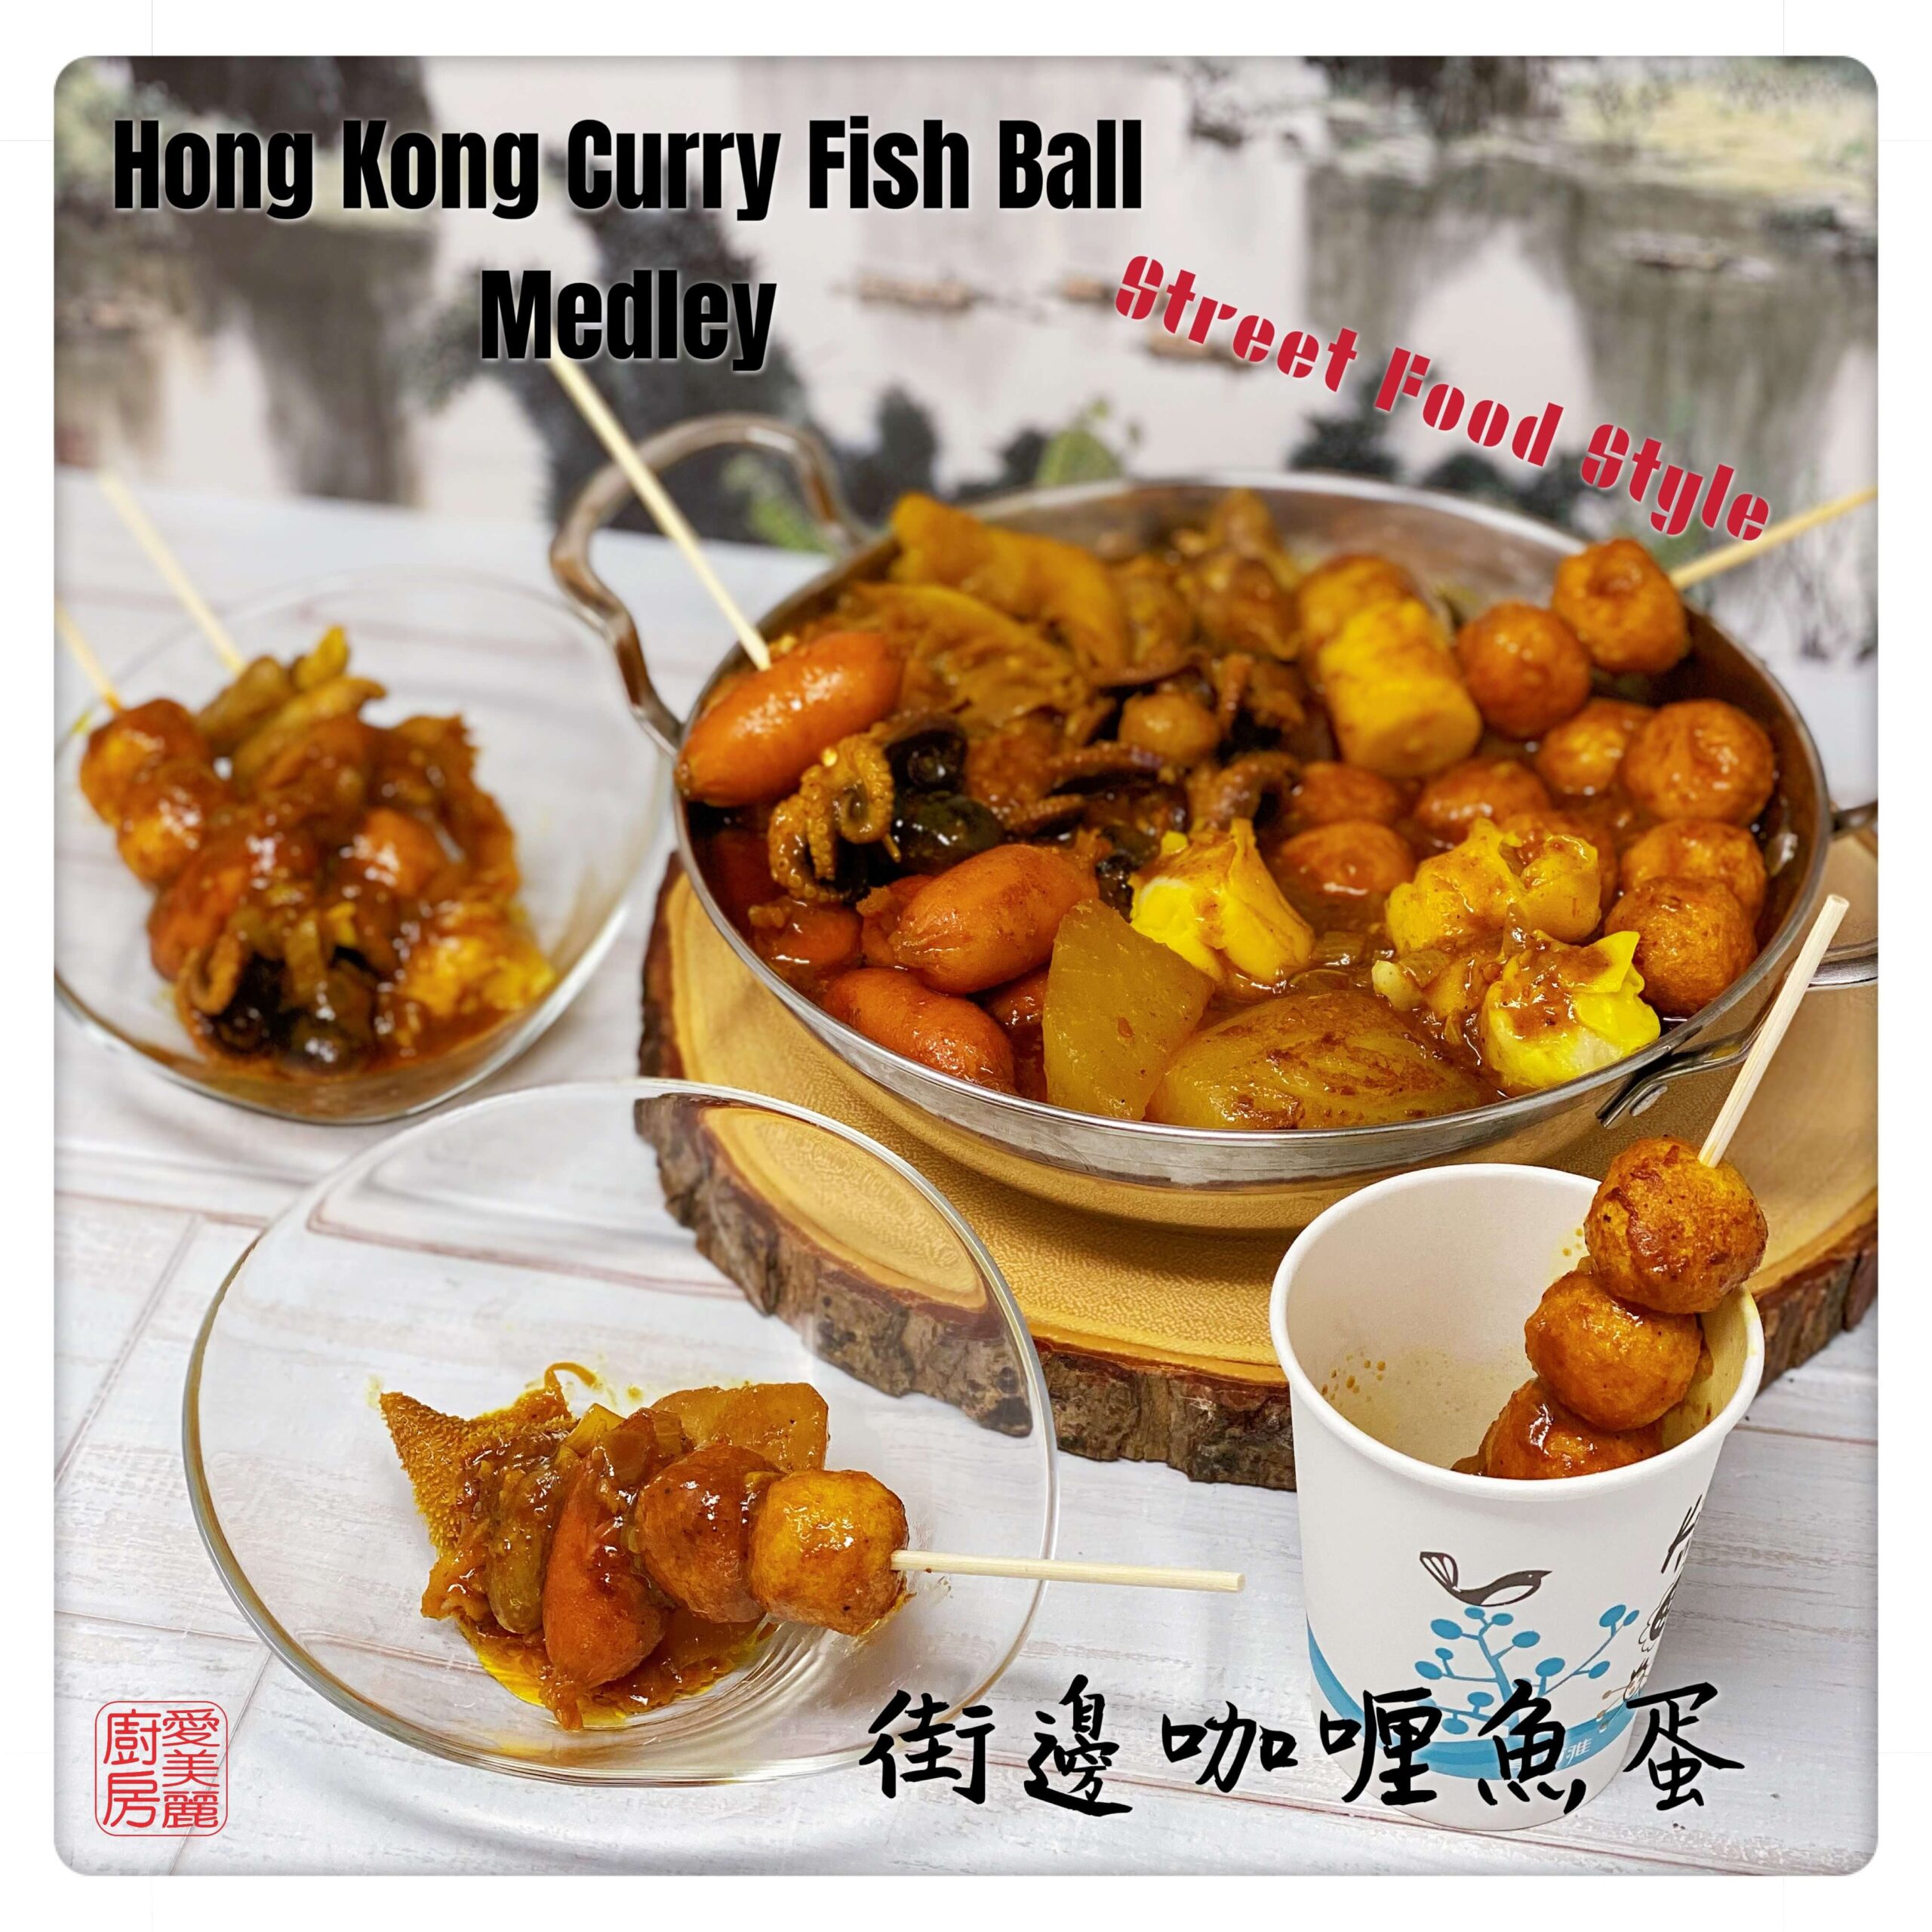 Hong Kong Curry Fish Balls 街邊咖哩魚蛋 - Auntie Emily's Kitchen